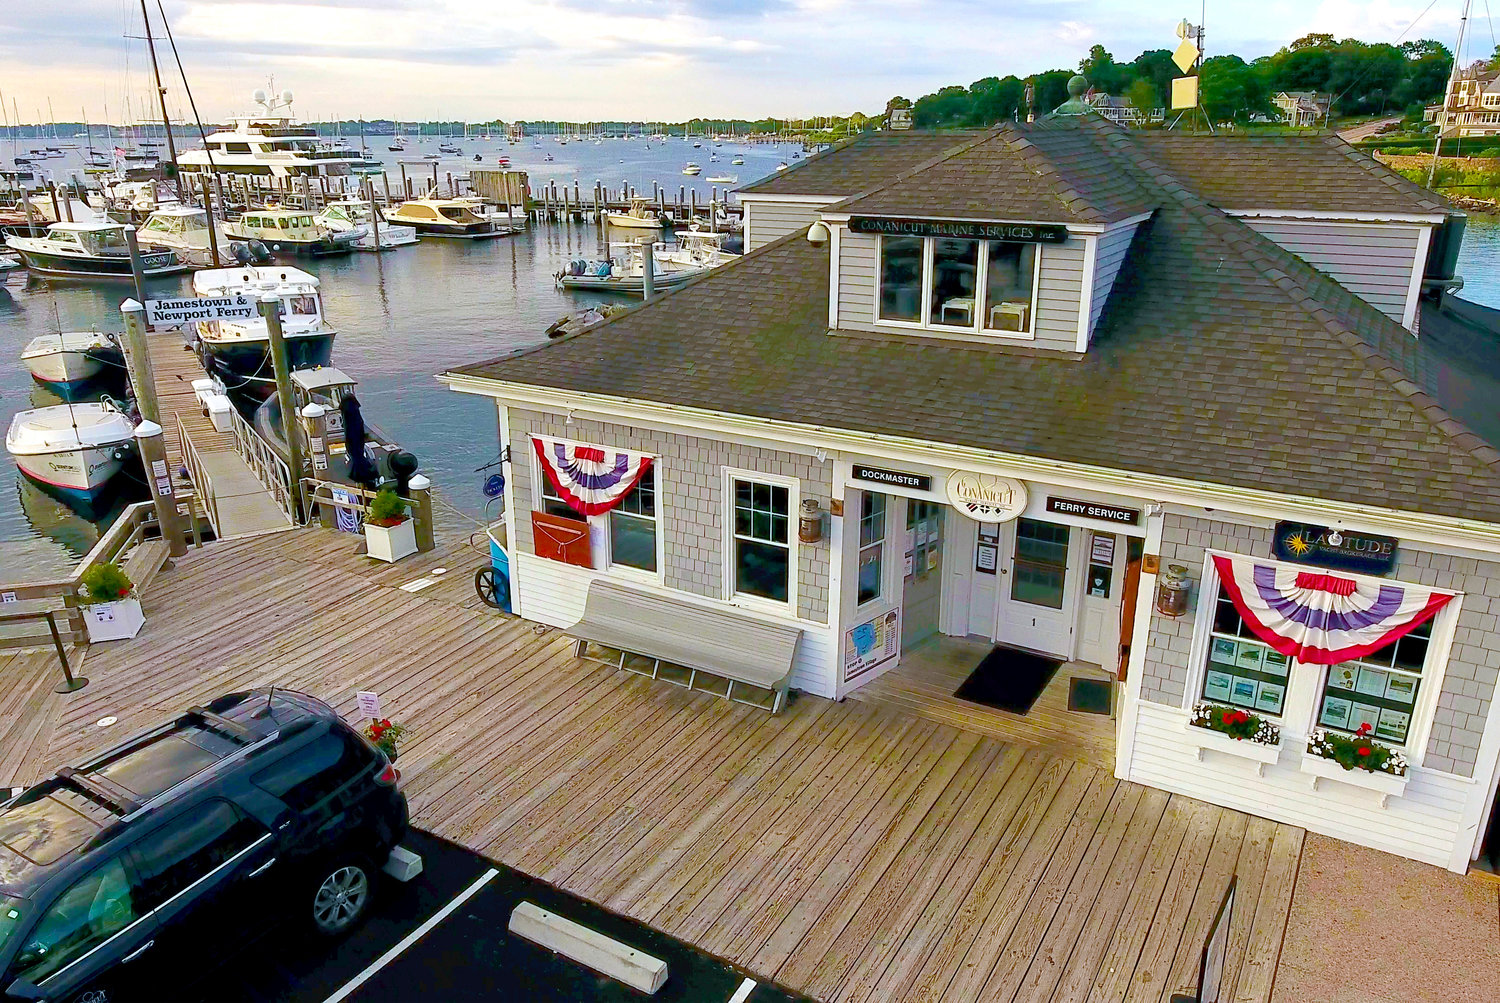 Conanicut Marina is home to a boat yard, ferry service, scenic cruises, private charters, and even retail